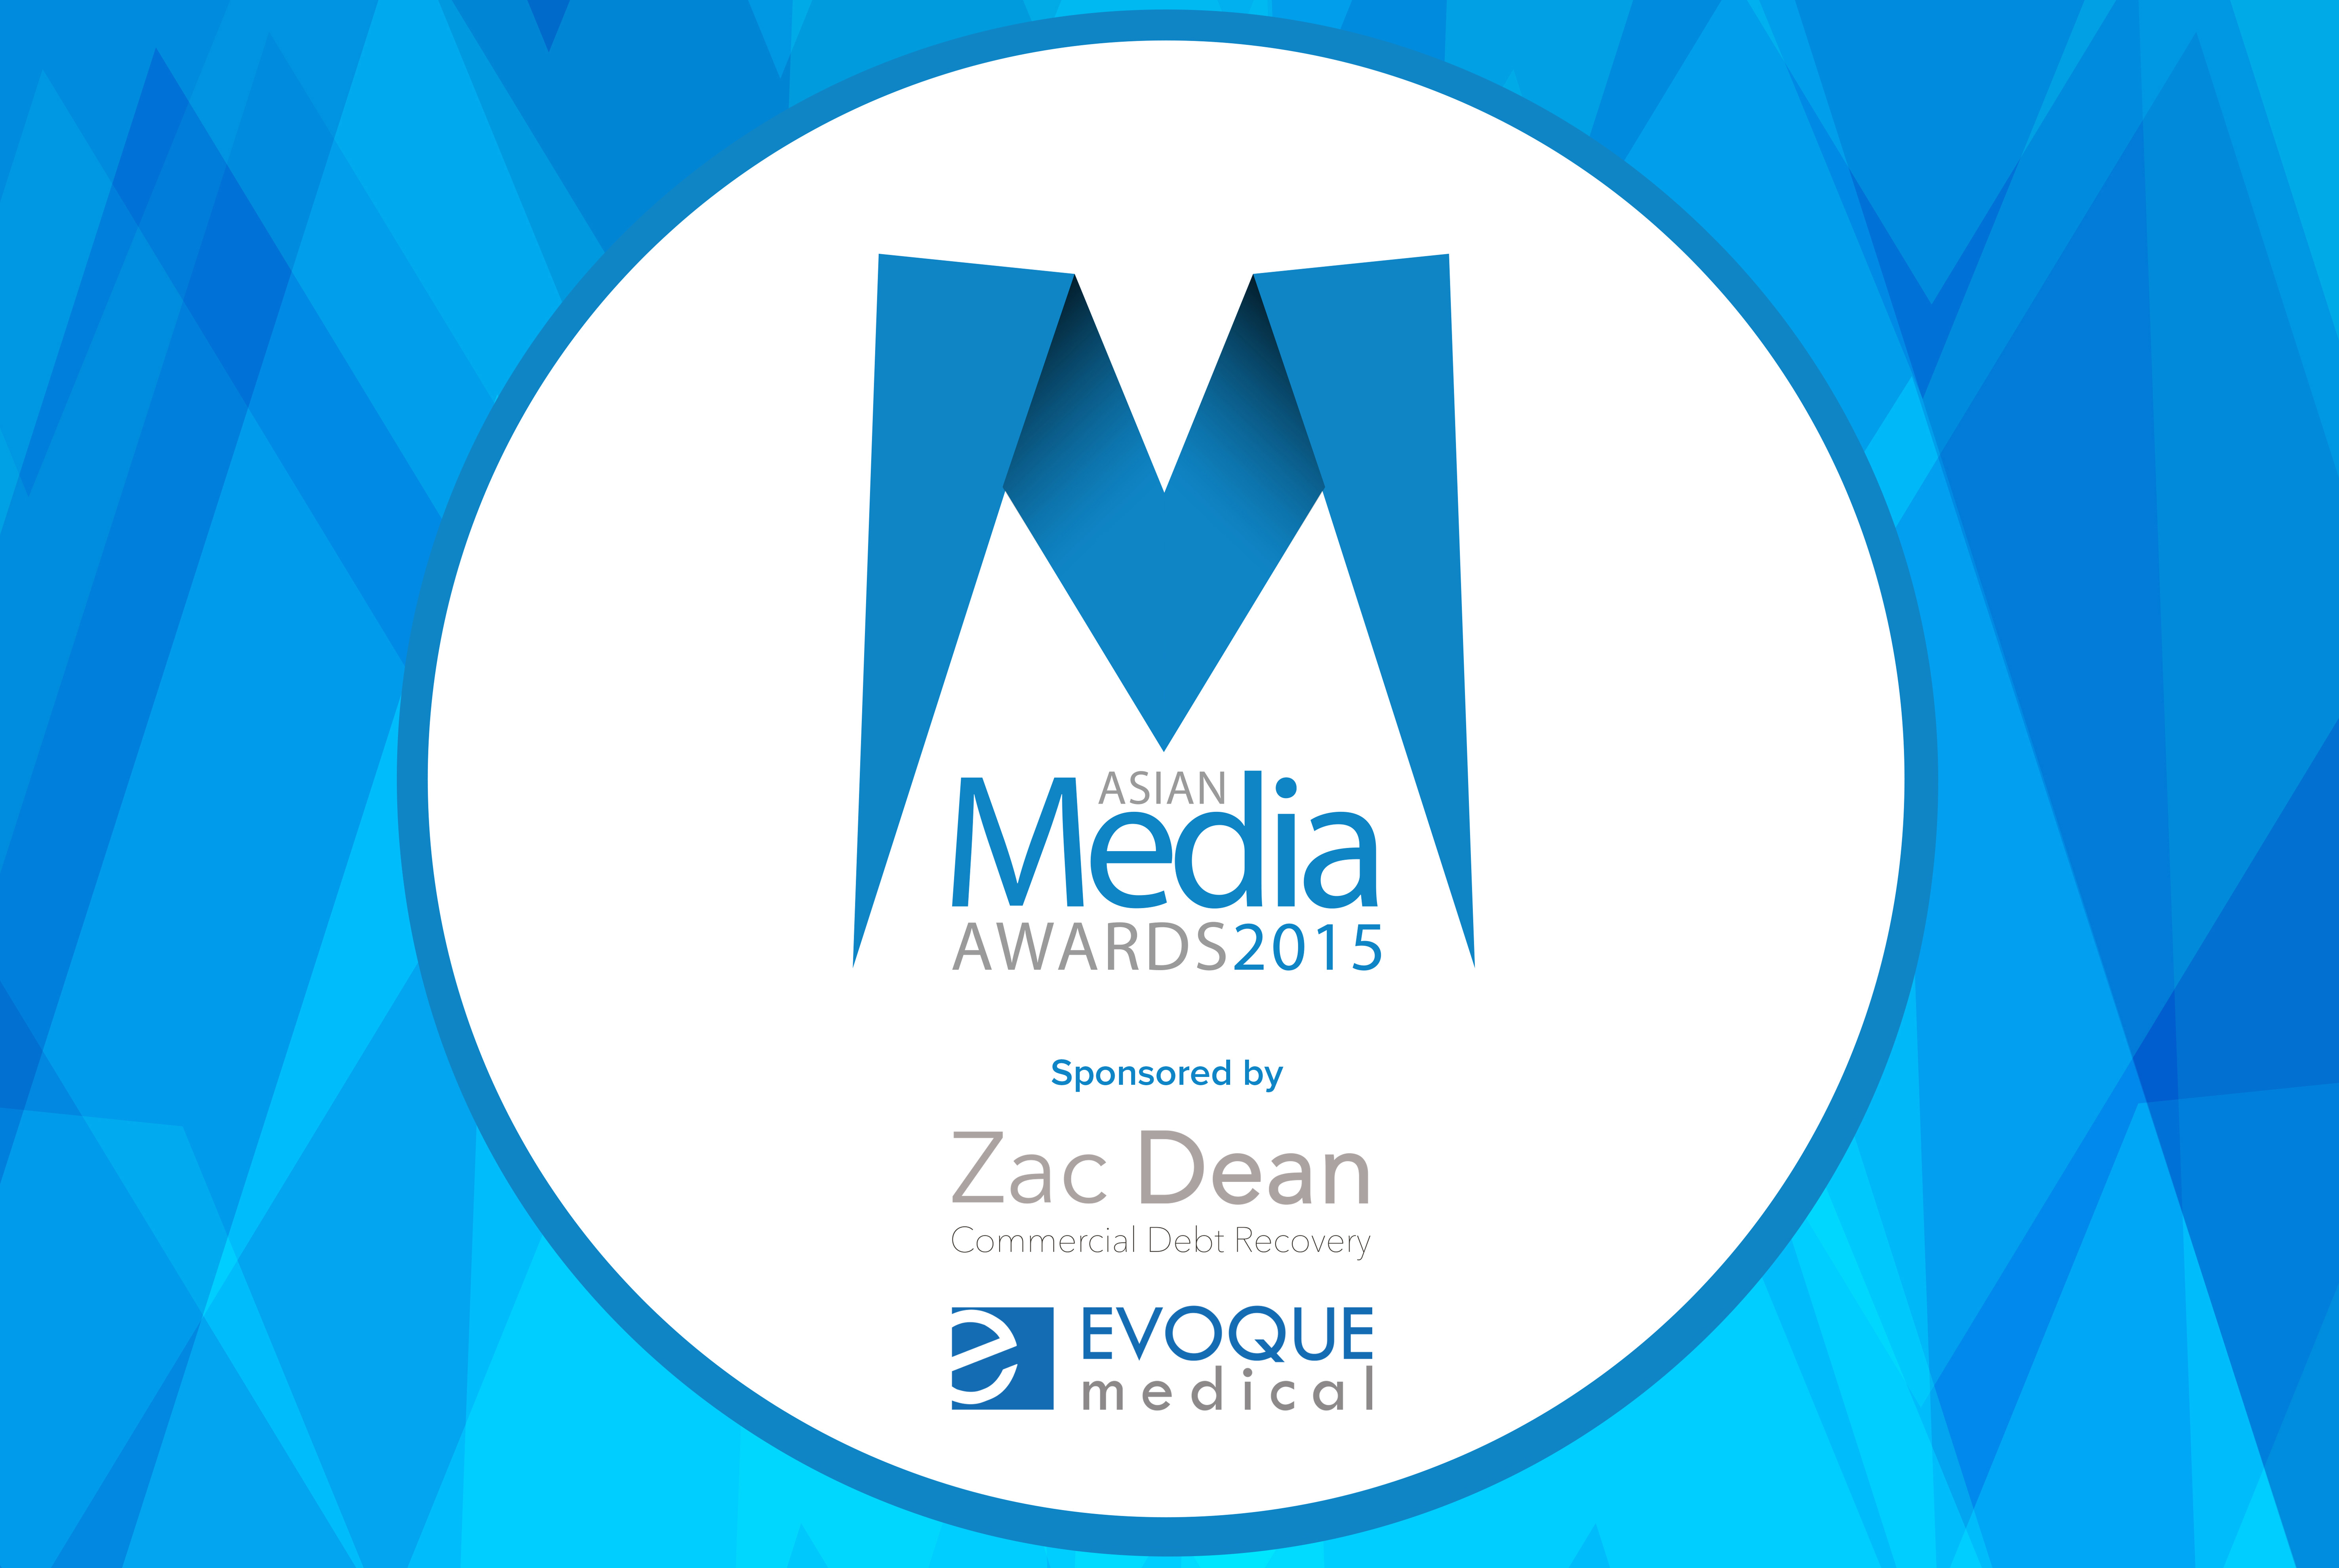 Evoque Medical & Zac Dean To Support Asian Media Awards